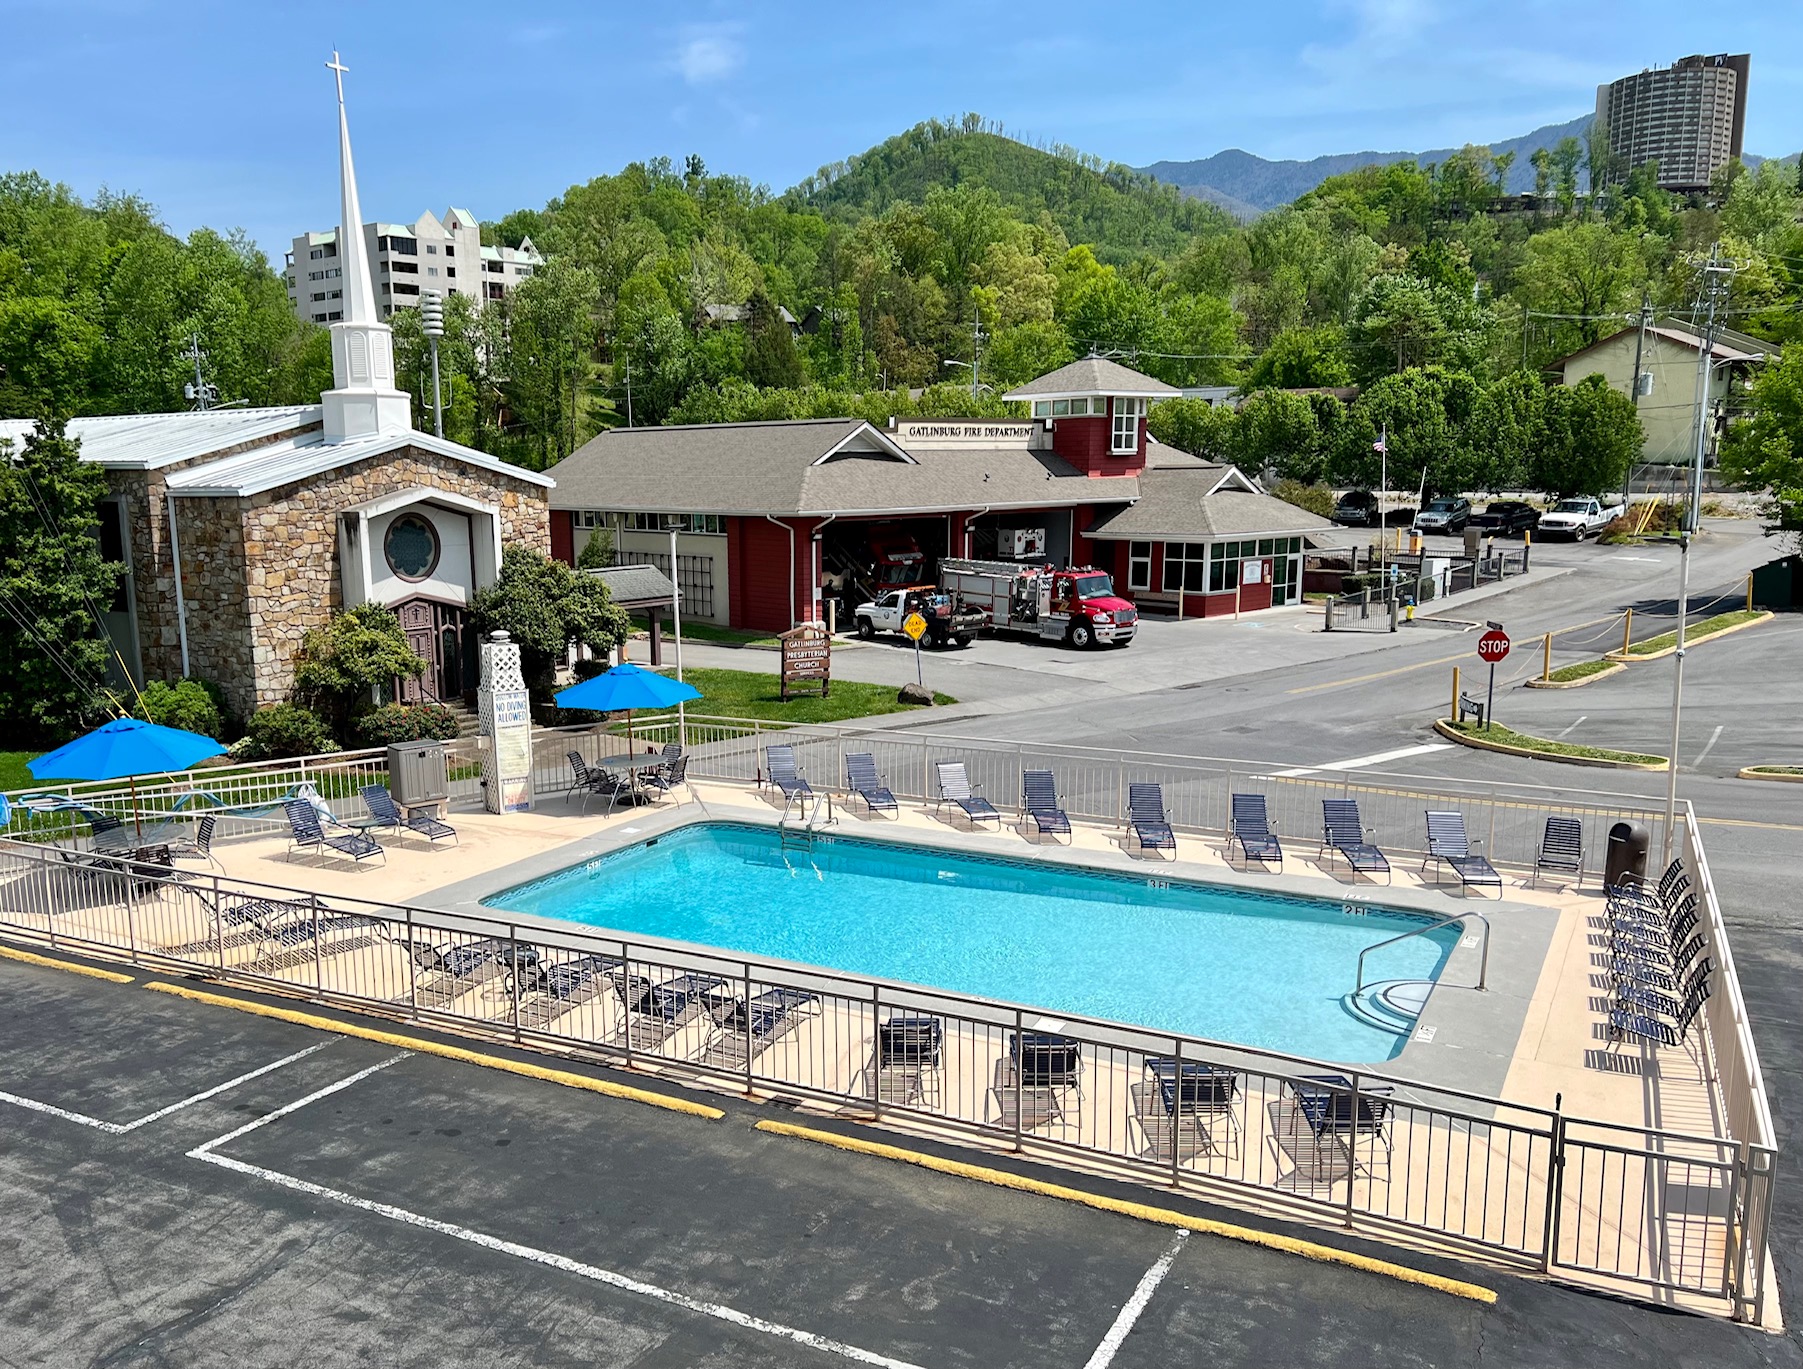 aerial shot of The Gillette's swimming pool. The Gatlinburg Fire Department can be seen across the street